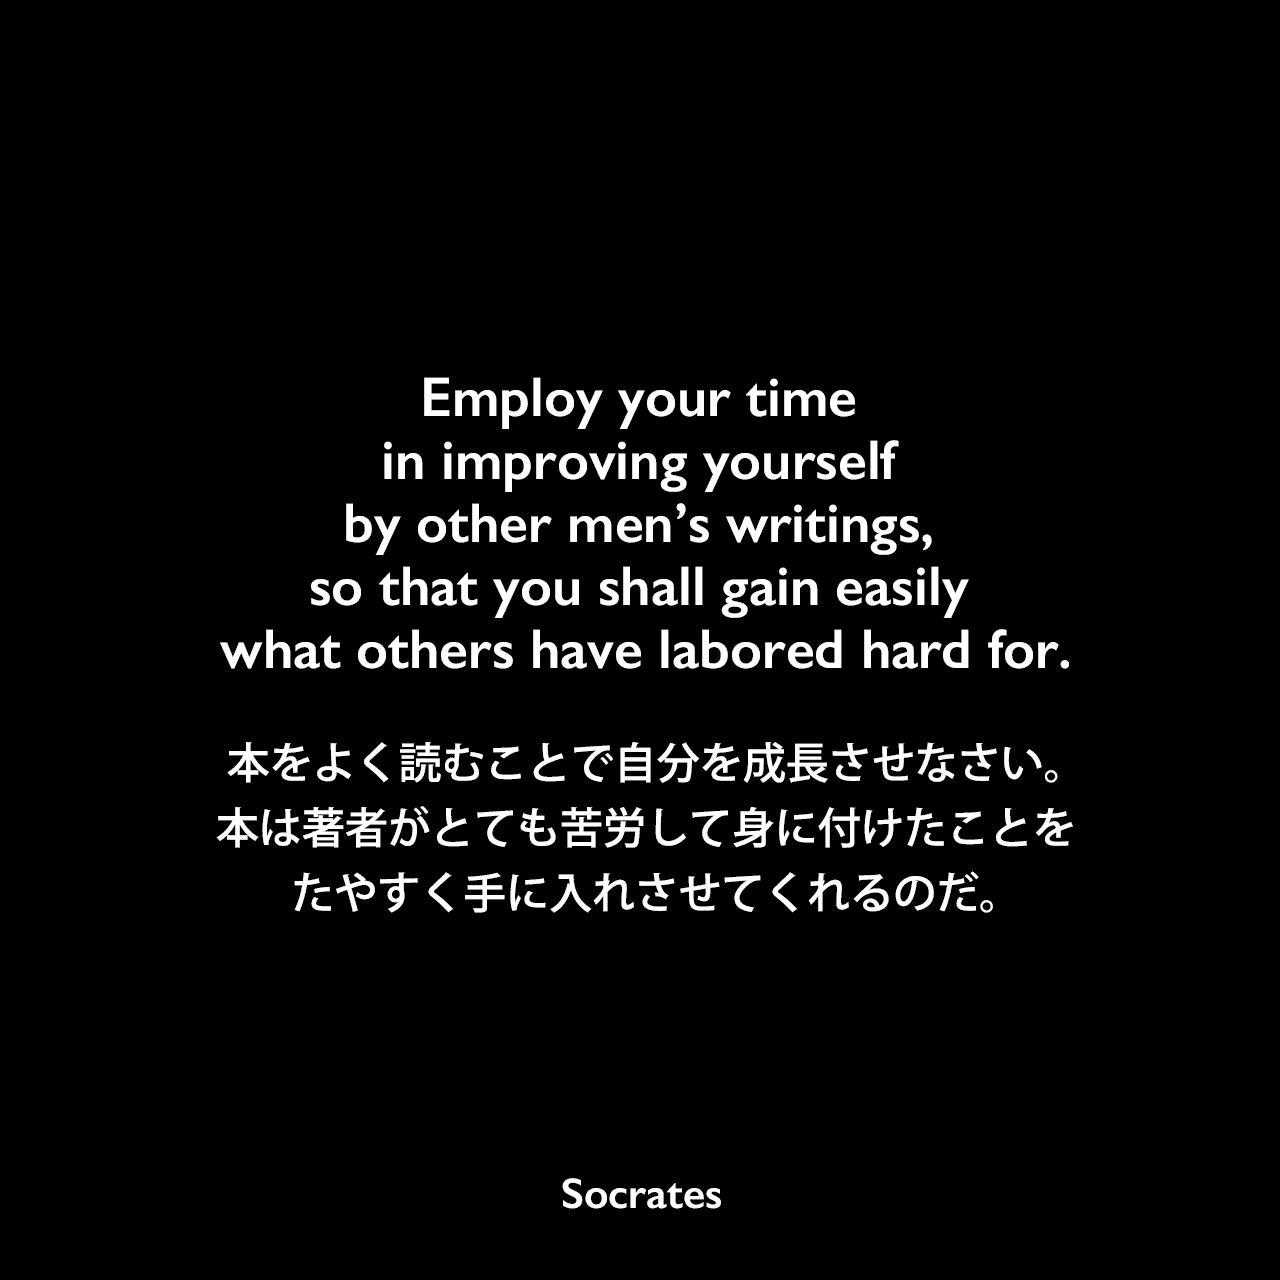 Employ your time in improving yourself by other men’s writings, so that you shall gain easily what others have labored hard for.本をよく読むことで自分を成長させなさい。本は著者がとても苦労して身に付けたことを、たやすく手に入れさせてくれるのだ。Socrates